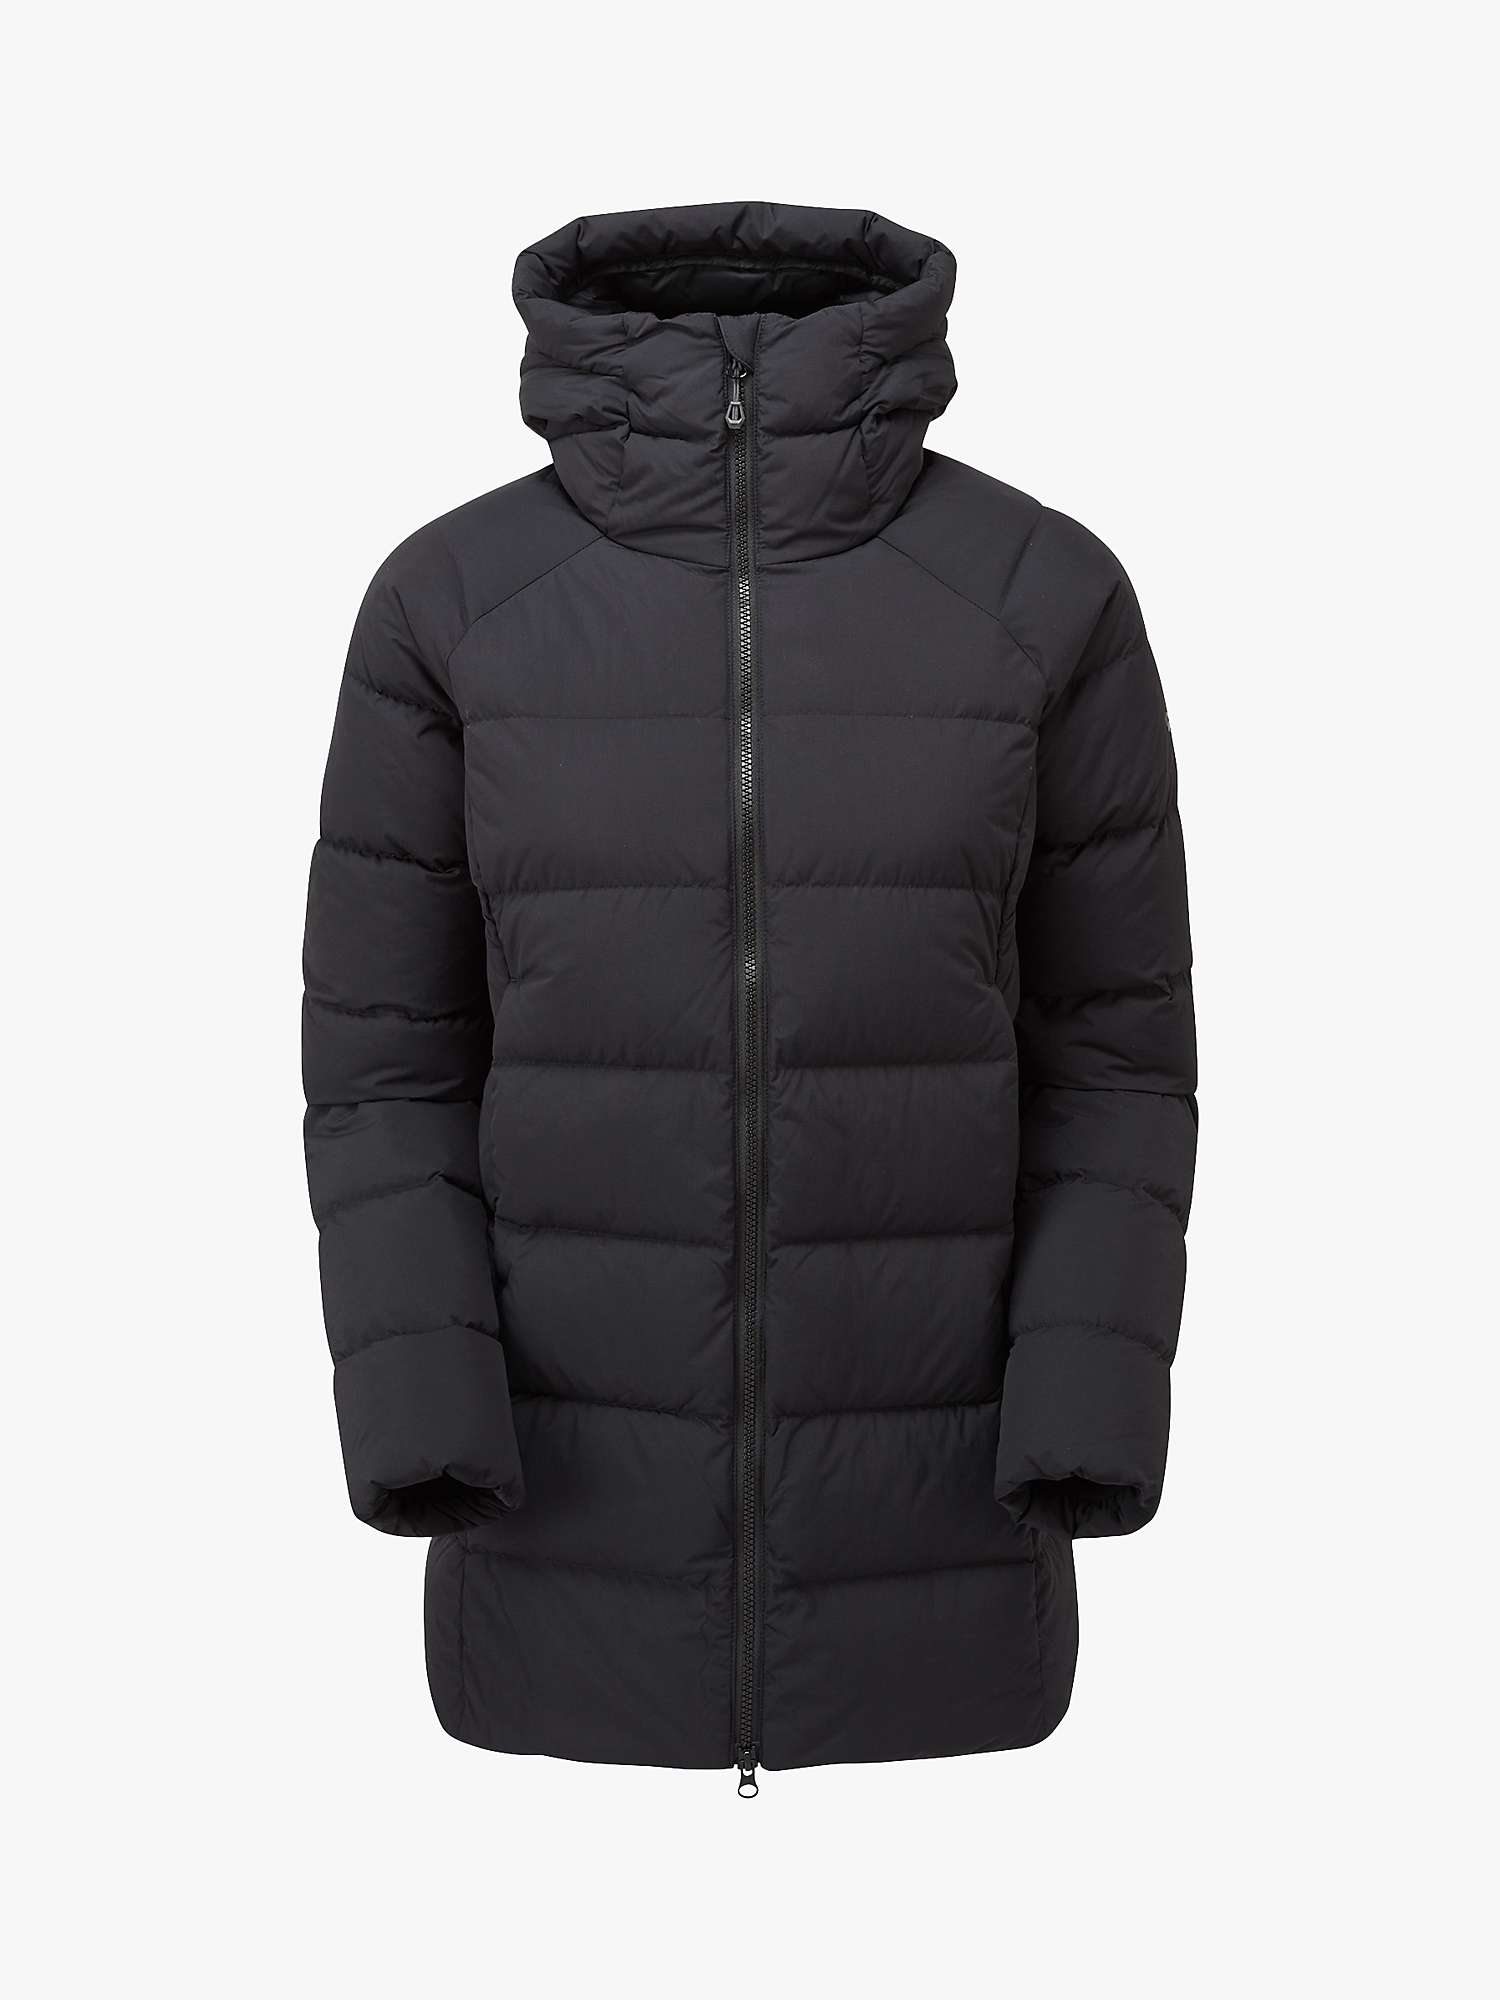 Buy Montane Tundra Women's Recycled Down Puffer Jacket Online at johnlewis.com